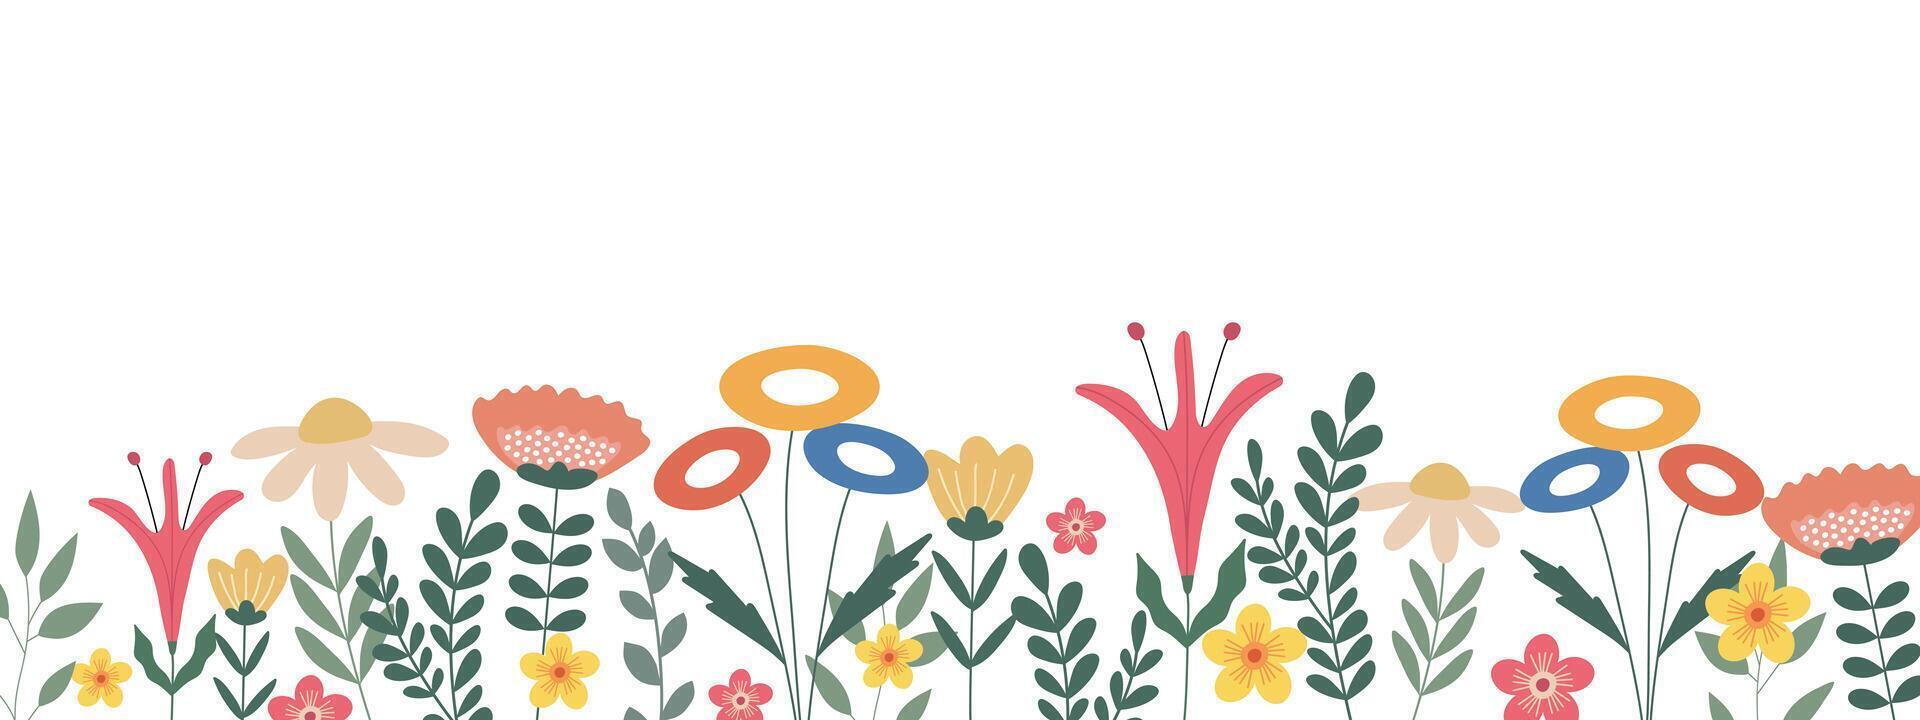 Horizontal floral background decorated with bright blooming flowers and leaves. vector